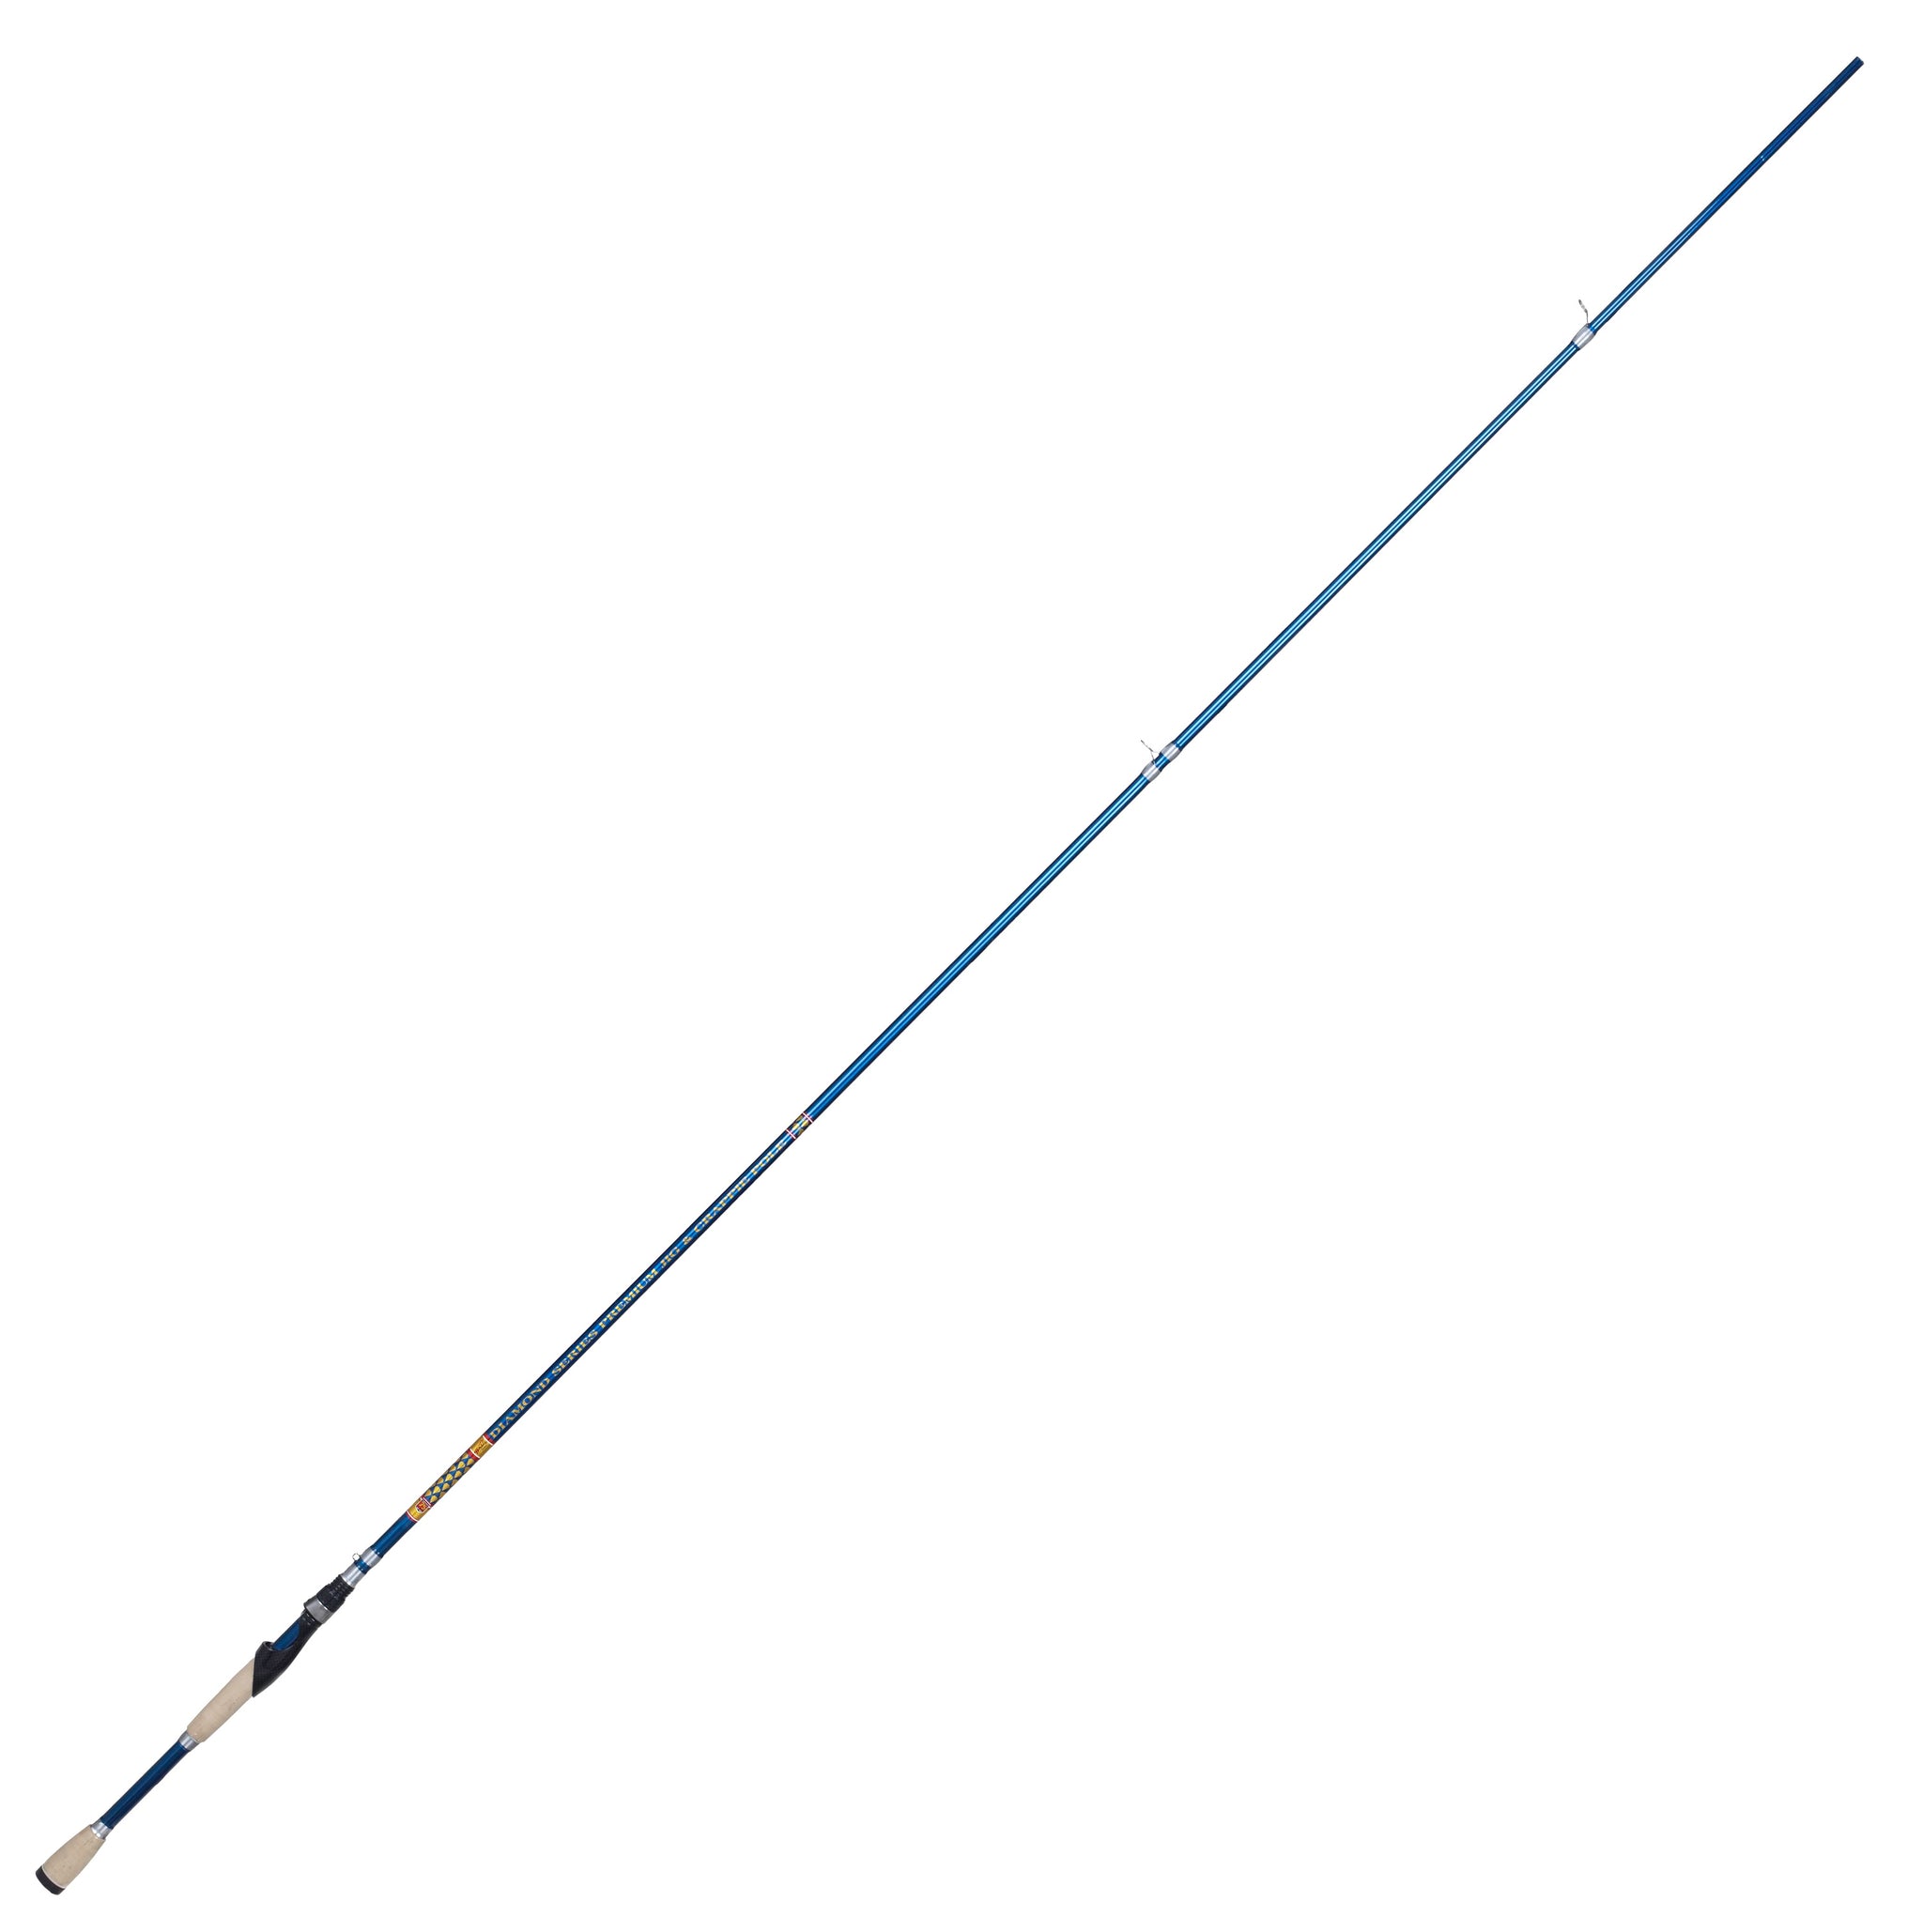 Alabama Rig Fishing Rods? Choosing a Fishing Rod for This Loved